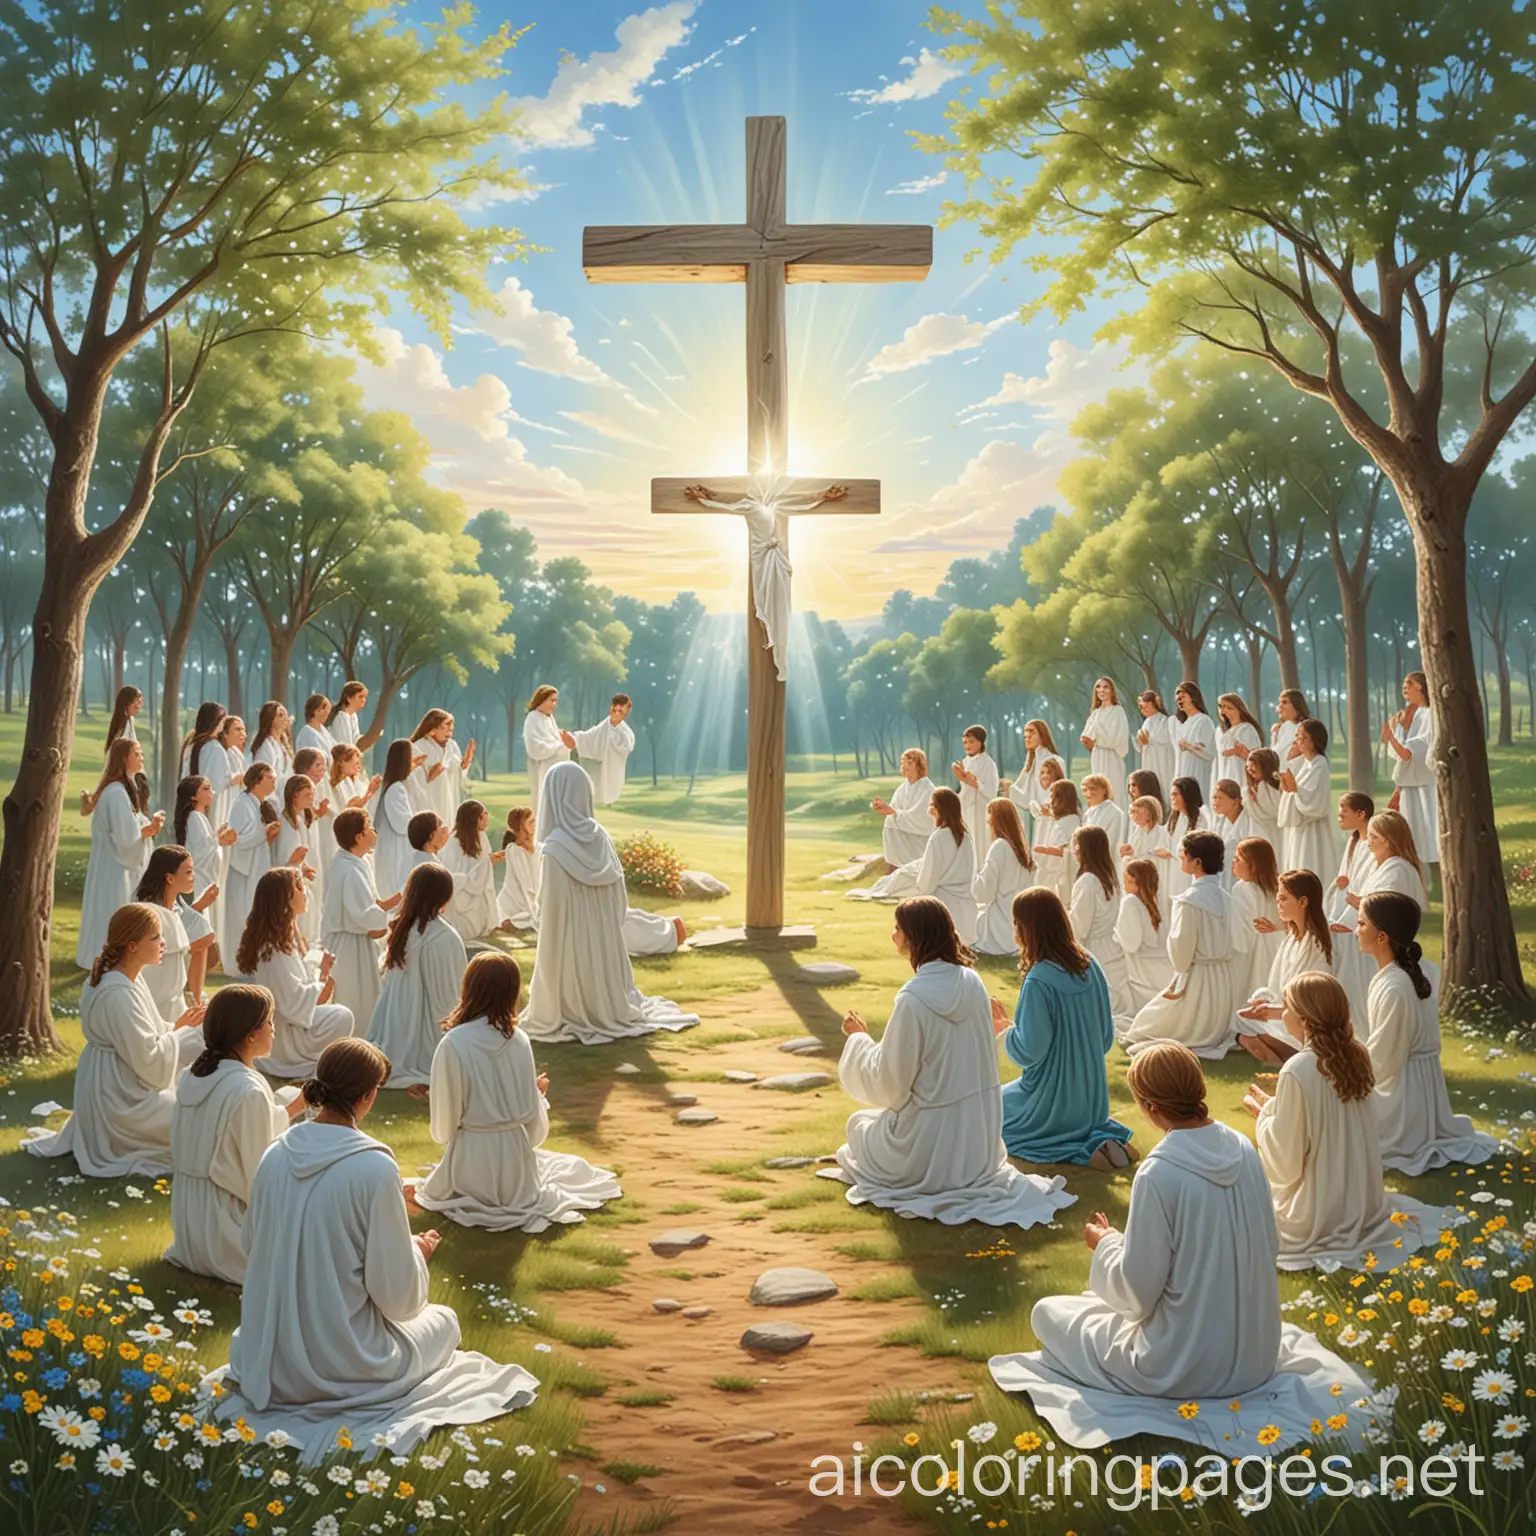 Create an illustration symbolizing the resurrection and the promise of eternal life. In the center of the image, there is an empty cross with a white cloth draped over its arms, symbolizing Jesus' resurrection. Surrounding the cross are children and adults engaged in different activities of prayer and drawing. Some are kneeling in prayer with expressions of joy and hope, while others are sitting on the ground or at small tables, drawing and writing with expressions of concentration and happiness. The background features a serene natural landscape with trees and blooming flowers, symbolizing new life and hope. A clear blue sky with rays of sunlight illuminates the cross and the people. The focal point is the empty cross in the center, with the children and adults around it. Use bright and warm tones to highlight the joy and hope, and soft, natural colors for the clothing and landscape. The style should be realistic and detailed, emphasizing reflection, hope, and community, Coloring Page, black and white, line art, white background, Simplicity, Ample White Space. The background of the coloring page is plain white to make it easy for young children to color within the lines. The outlines of all the subjects are easy to distinguish, making it simple for kids to color without too much difficulty